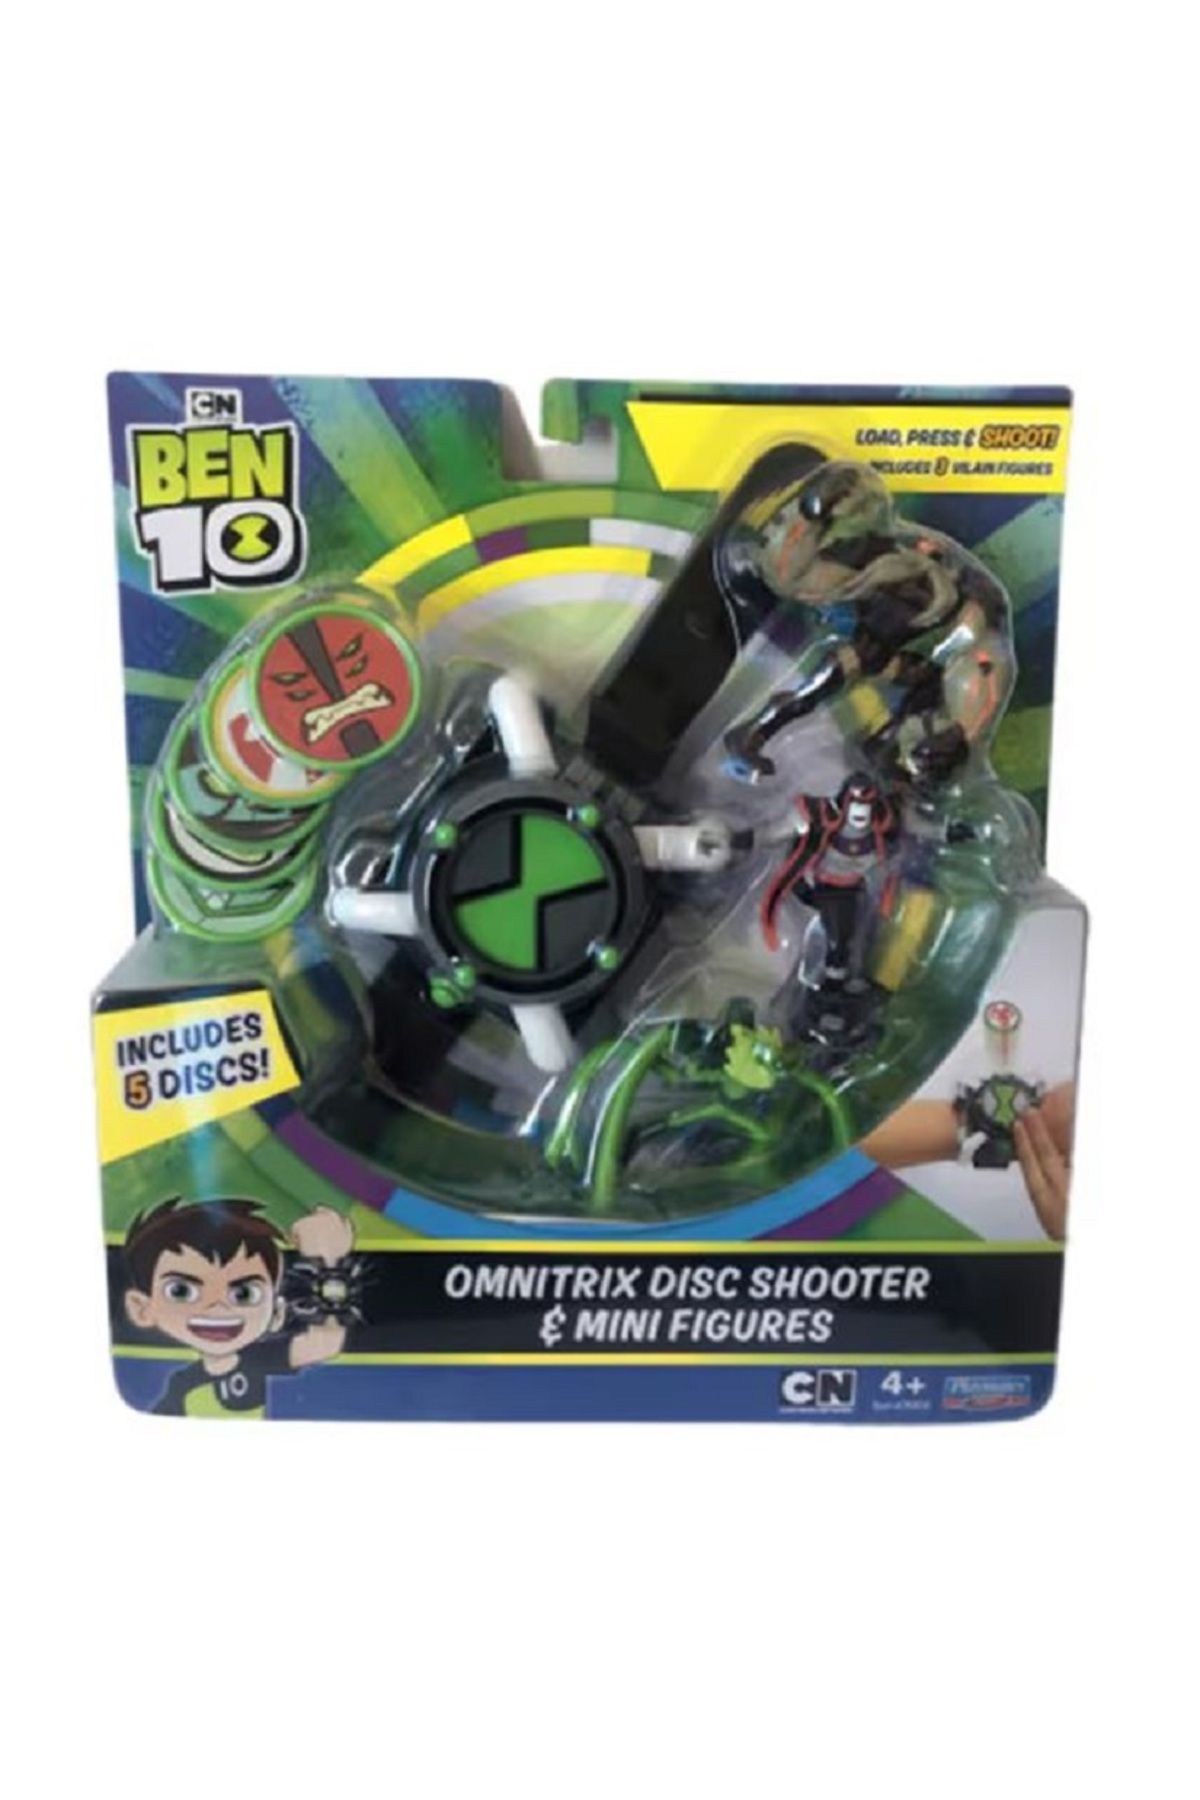 BEN10 Omnitrix Disc Shooter with Mini Figures Limited Edition